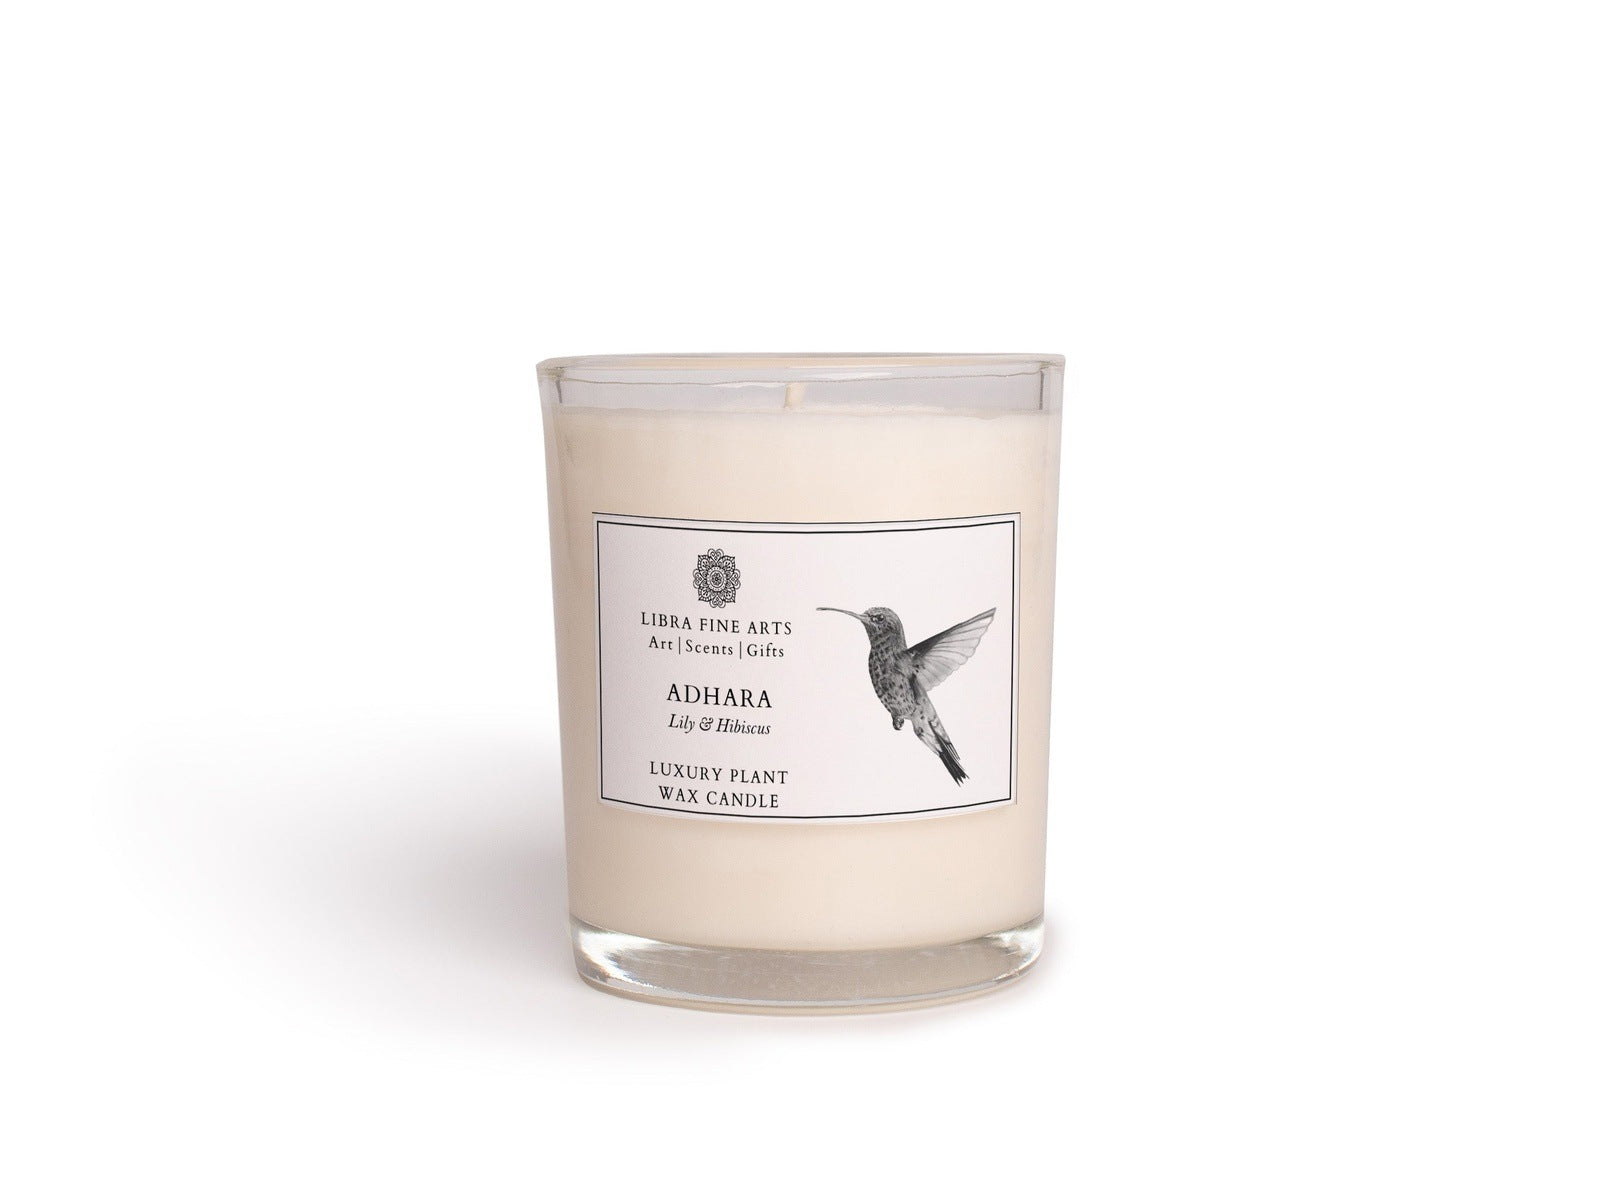 Hummingbird Lilly and Hibiscus Candle From Libra Fine Arts 